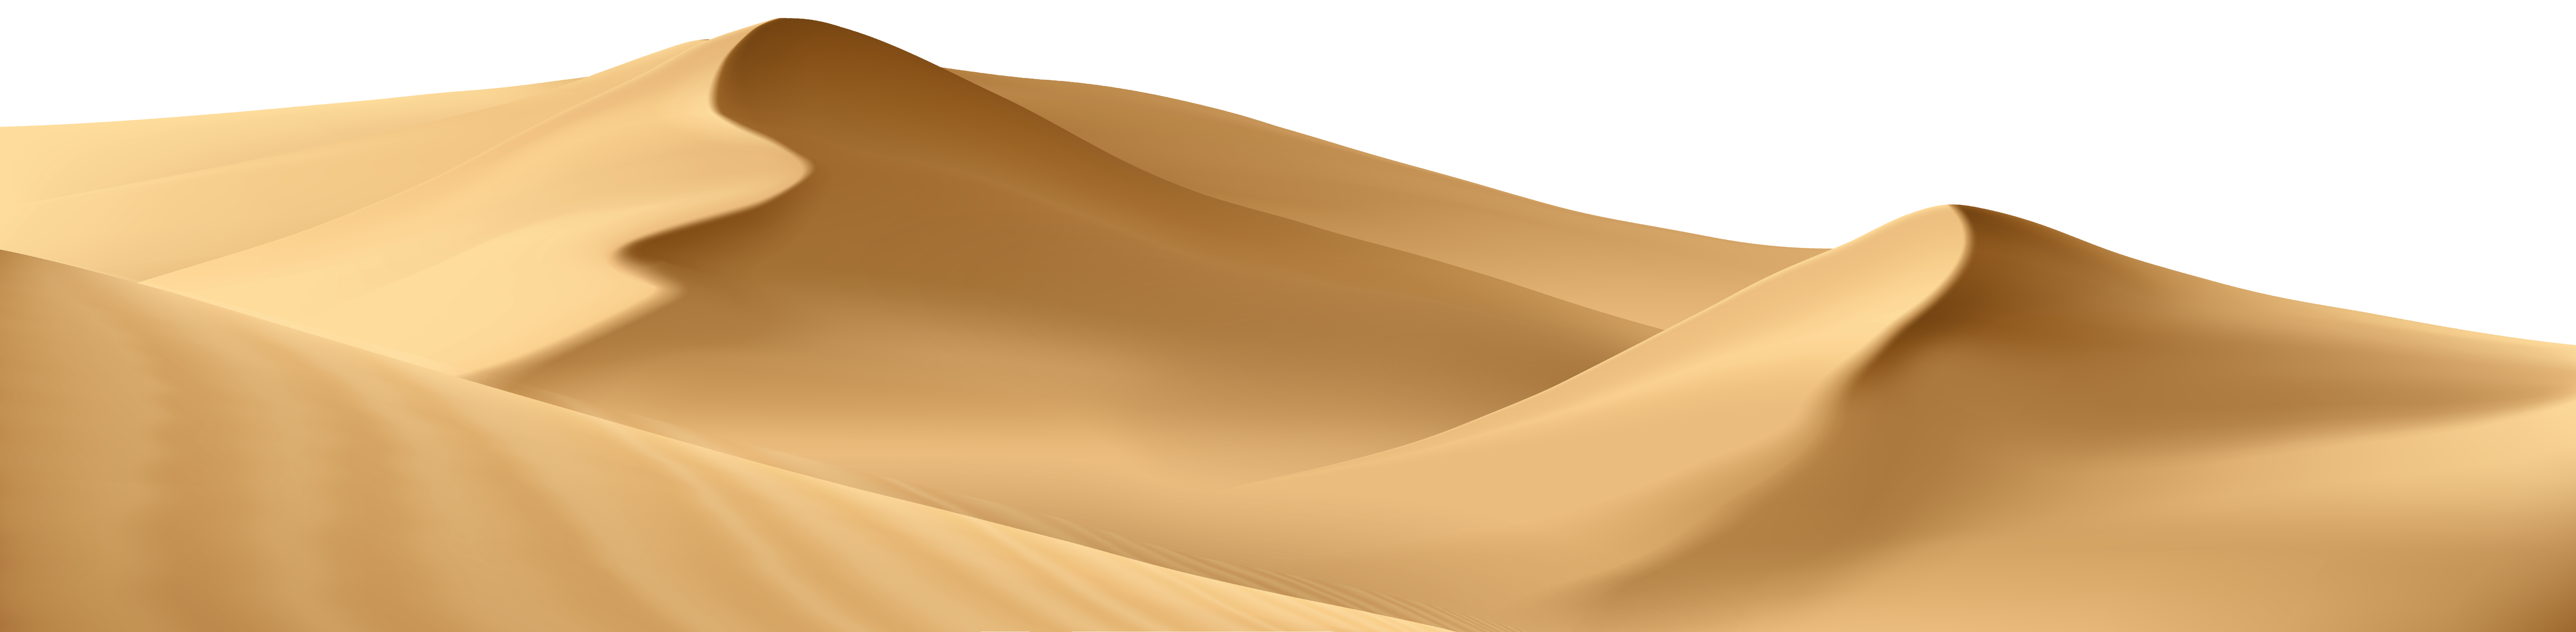 Sand Dunes PNG Clipart | Gallery Yopriceville - High-Quality Images and